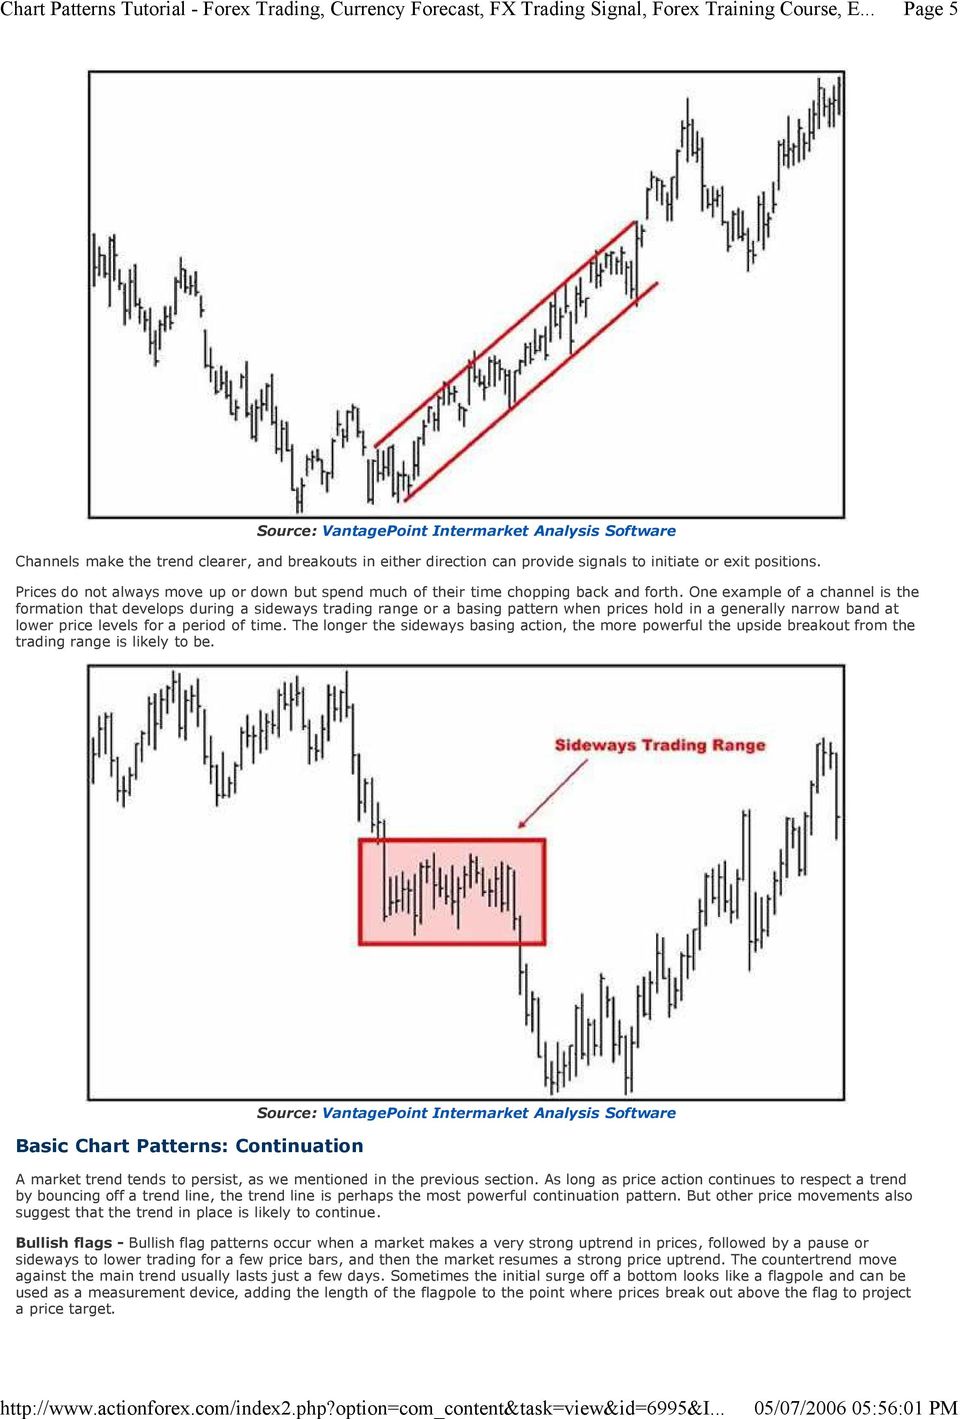 One example of a channel is the formation that develops during a sideways trading range or a basing pattern when prices hold in a generally narrow band at lower price levels for a period of time.